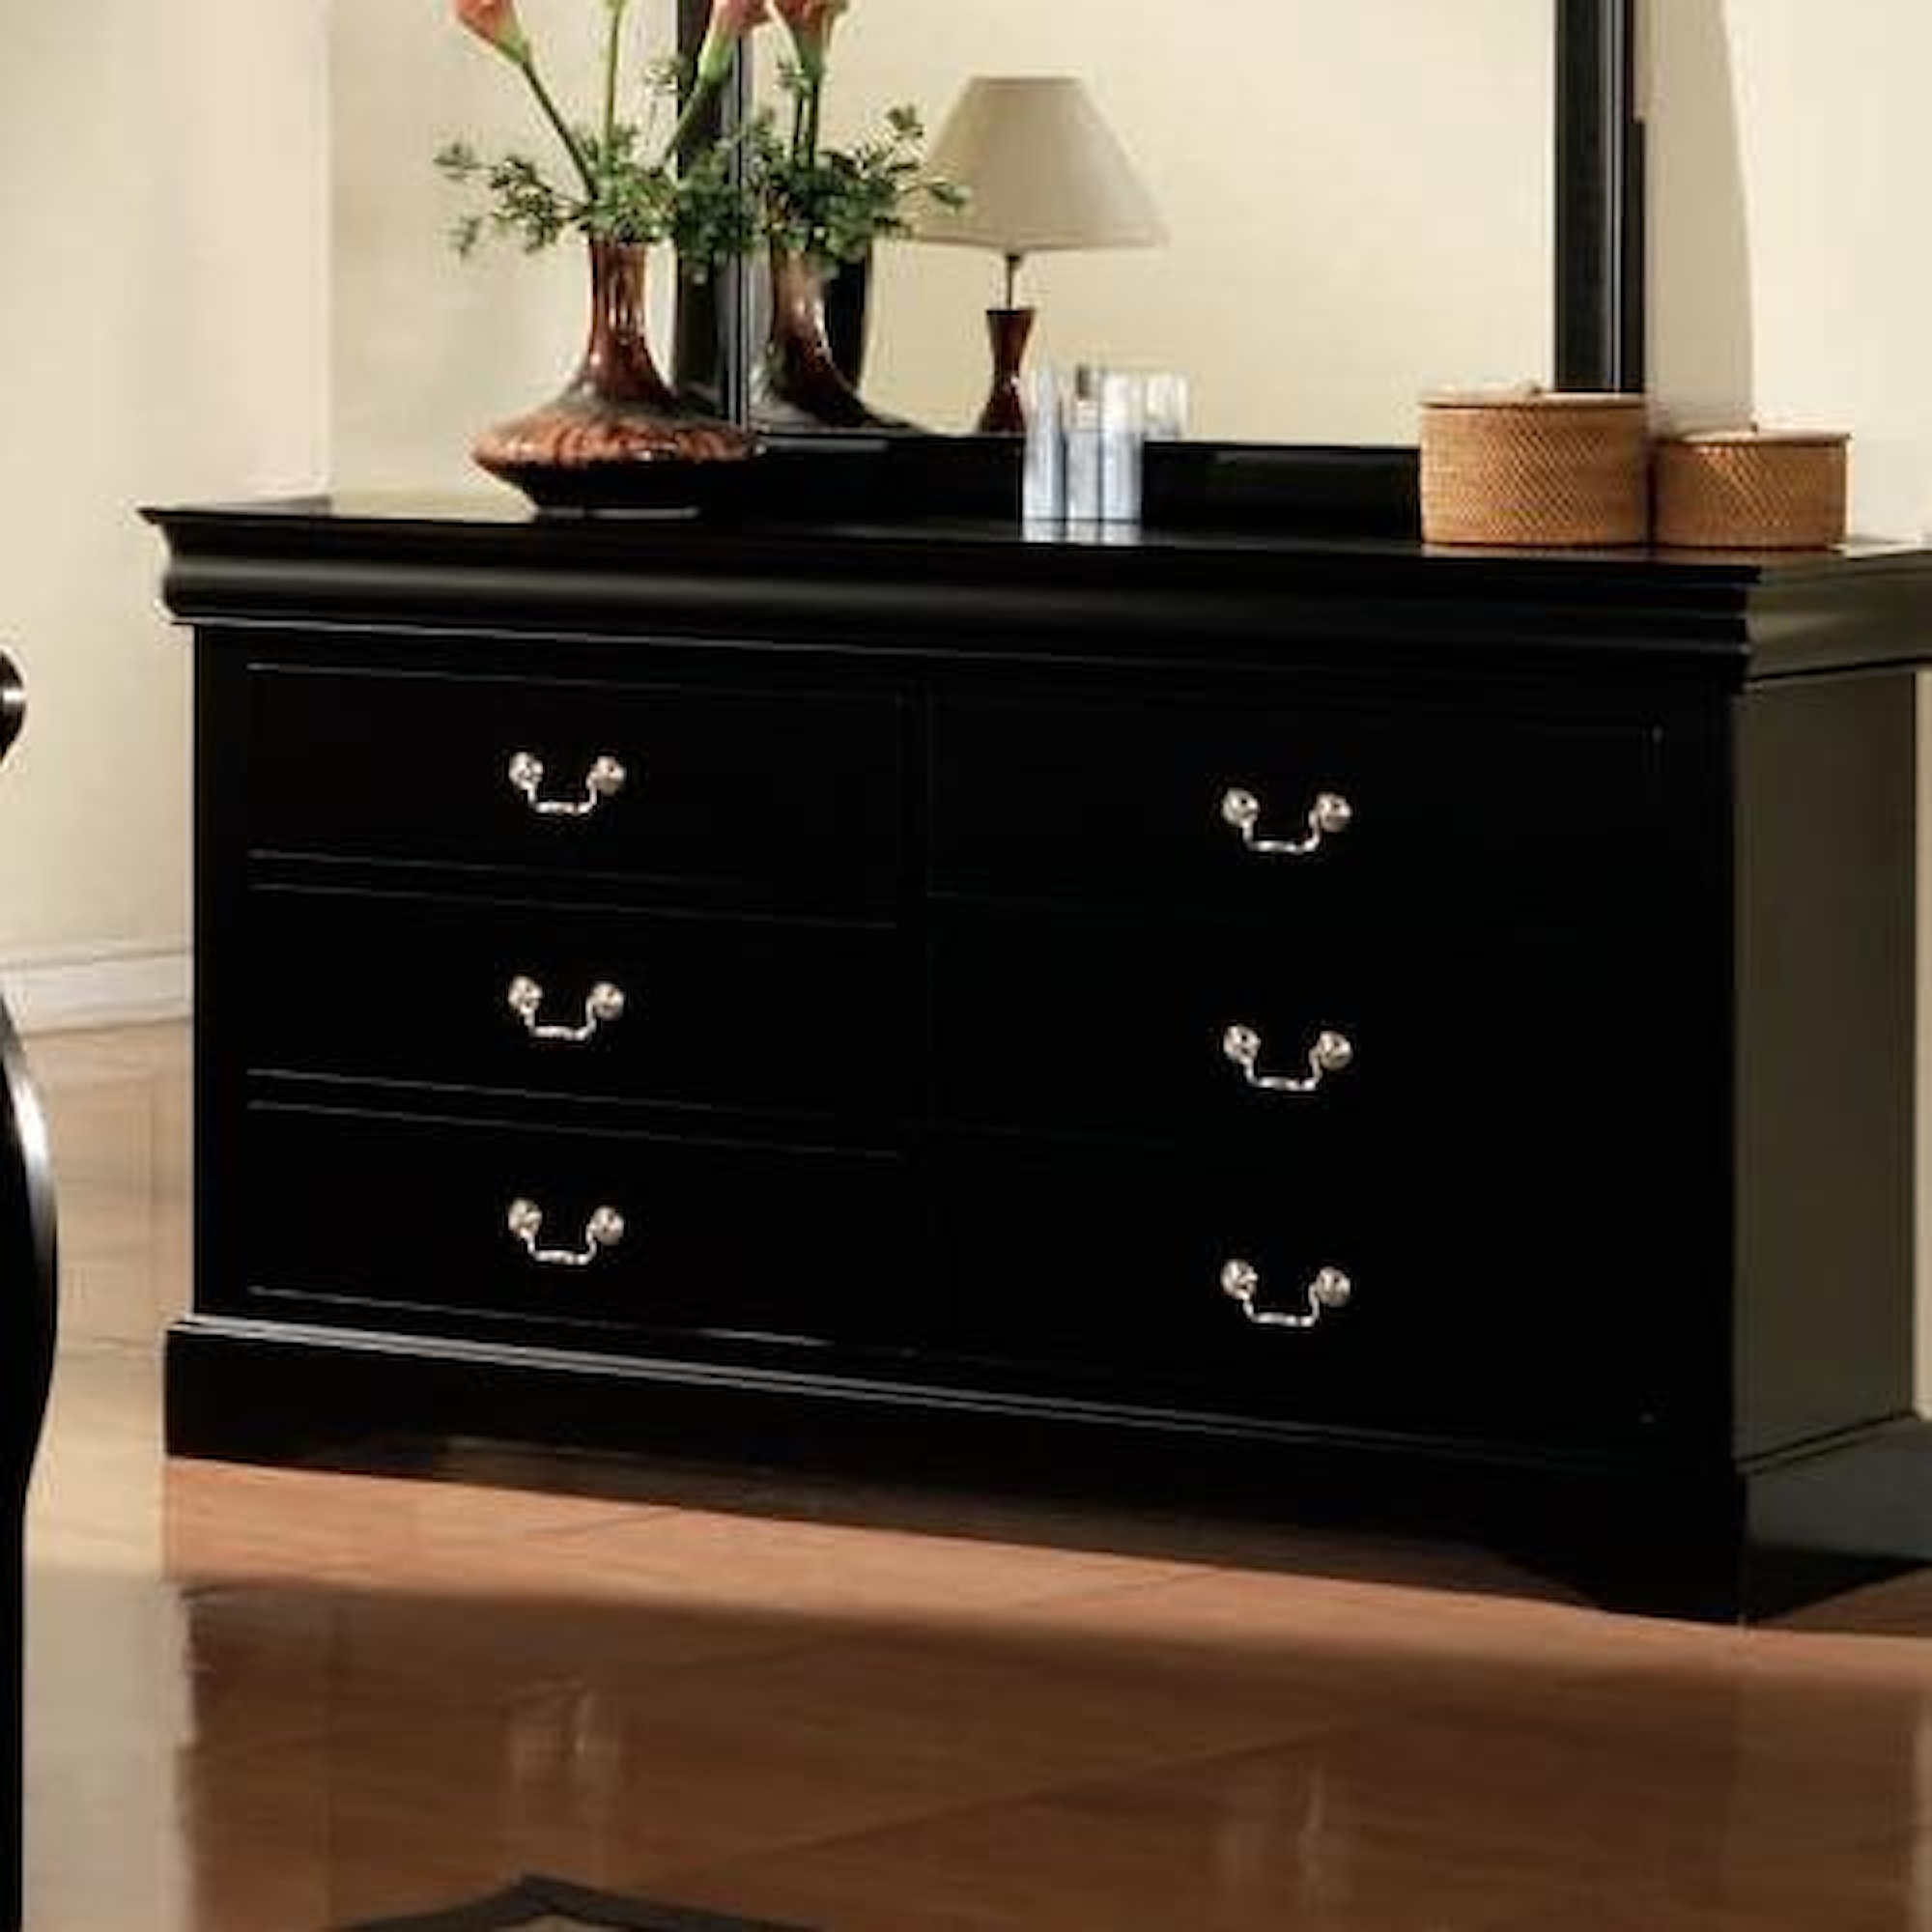 Acme Louis Philippe 5-Drawer Wooden Chest in Cherry